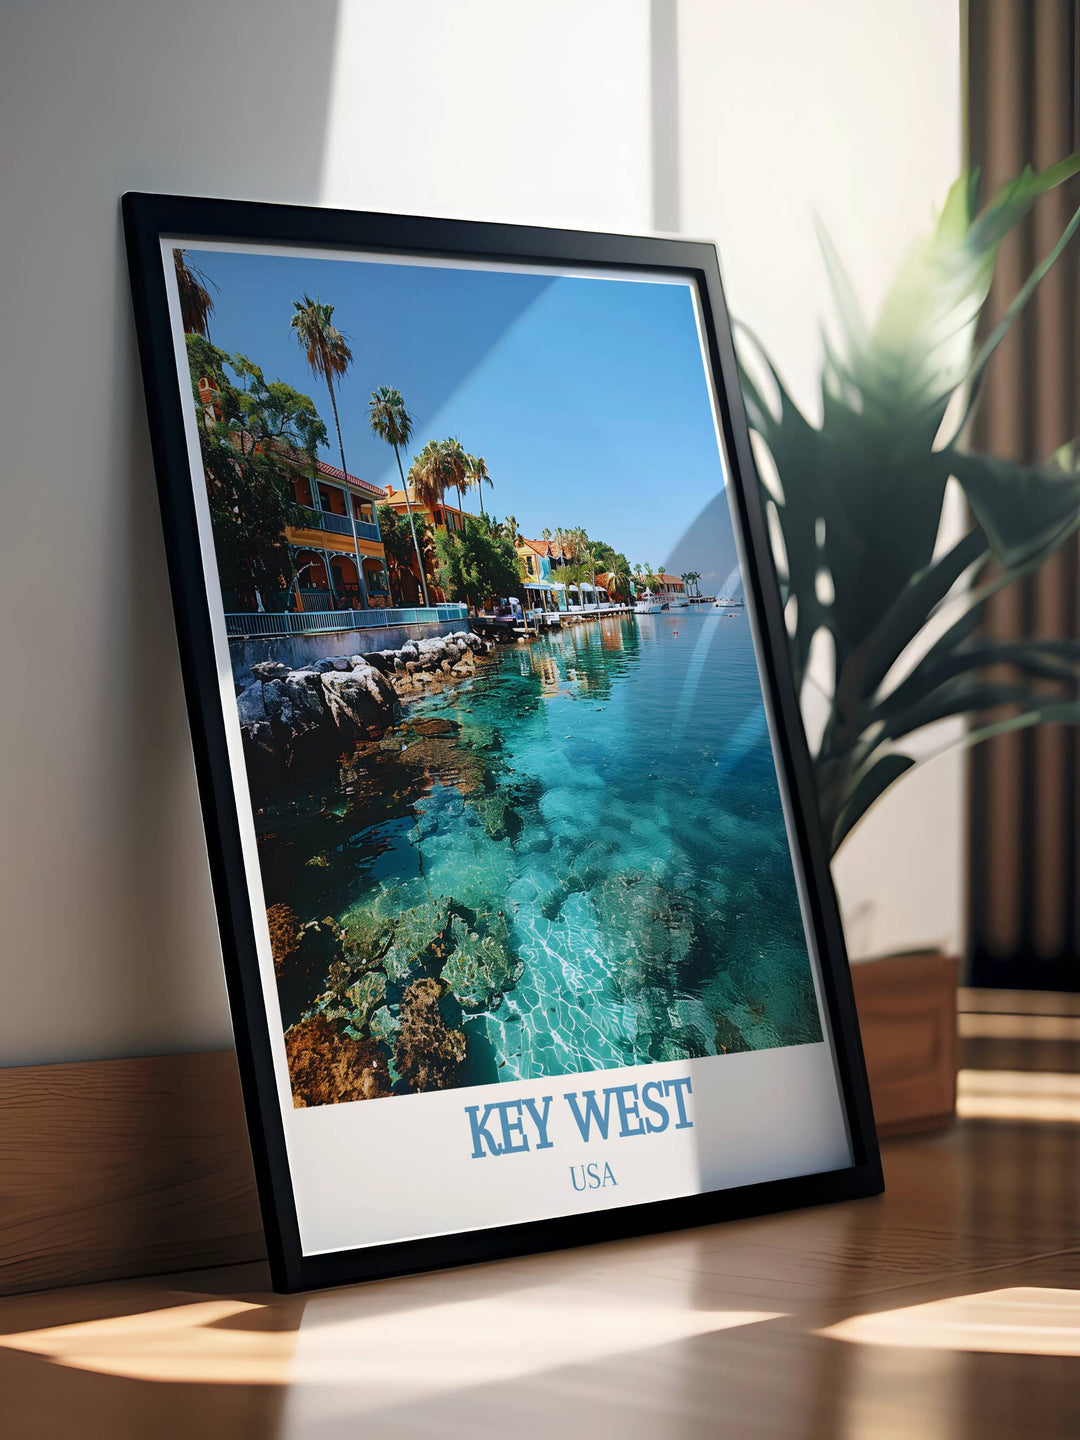 Exquisite Key West Wall Art of the Key West Historic Seaport a must have Florida Art Poster that brings historical charm to any room.